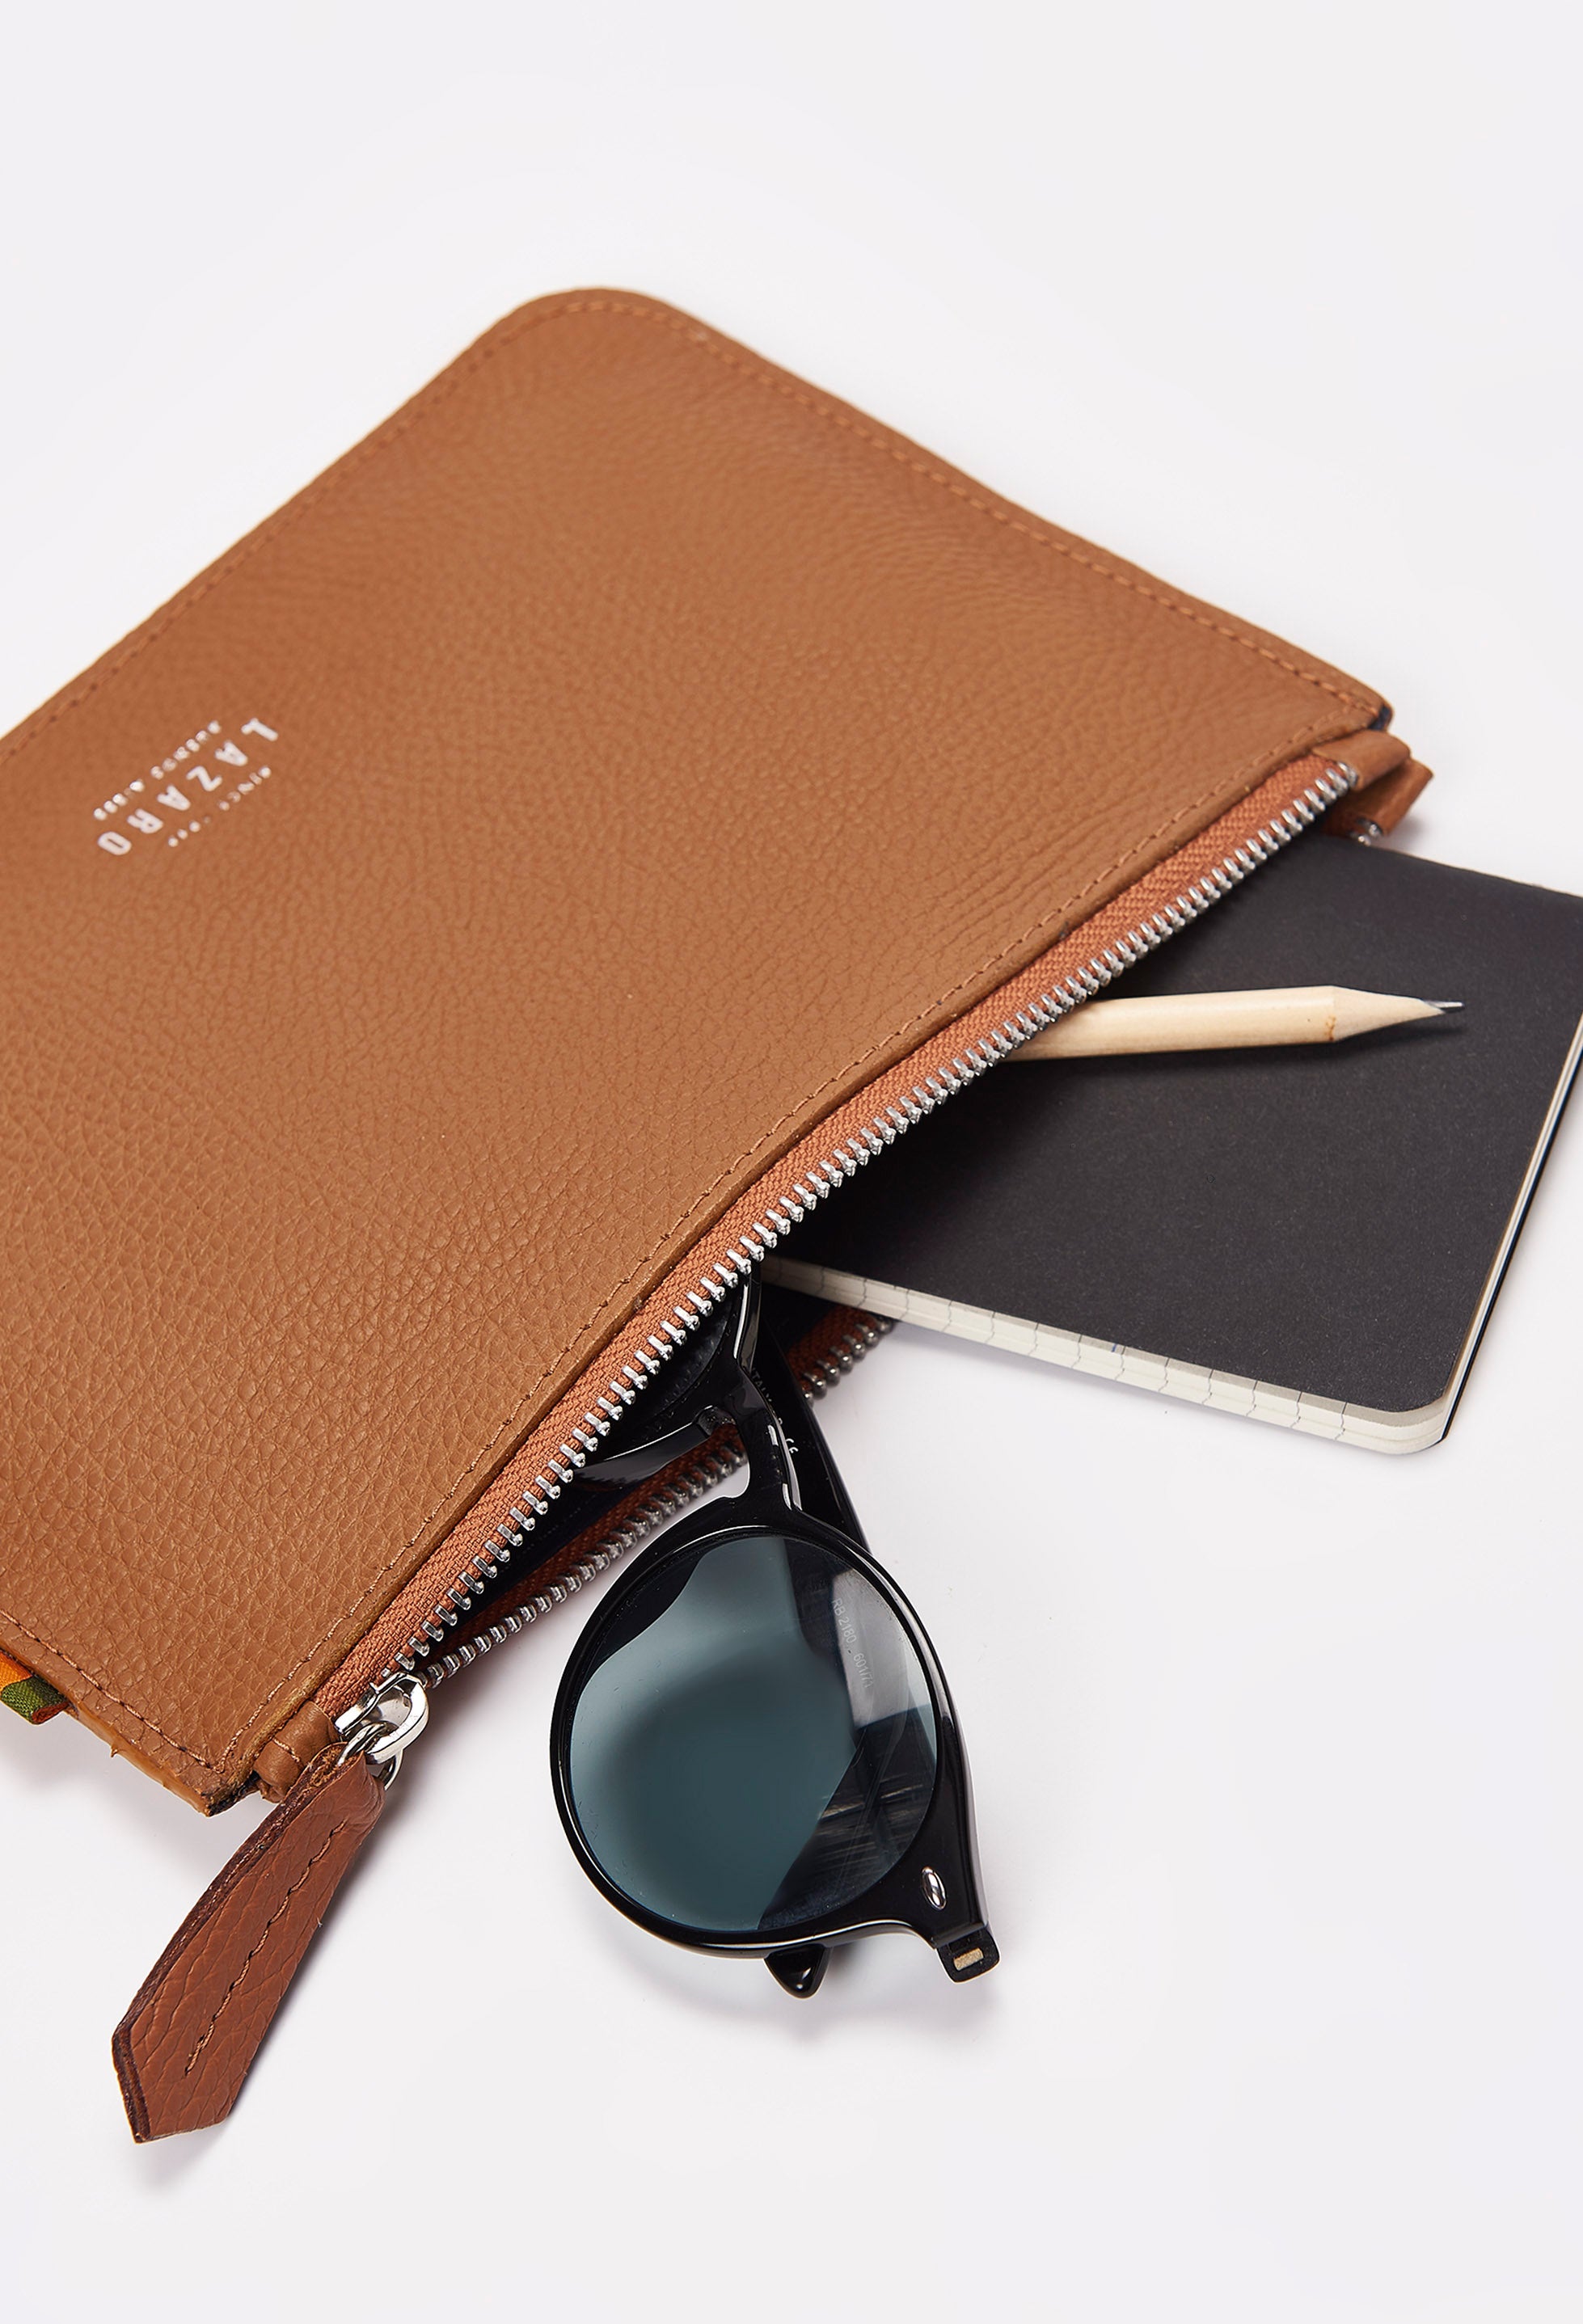 Interior of a Tan Leather Zipper Pouch packed with a notebook, a pencil and sunglasses.